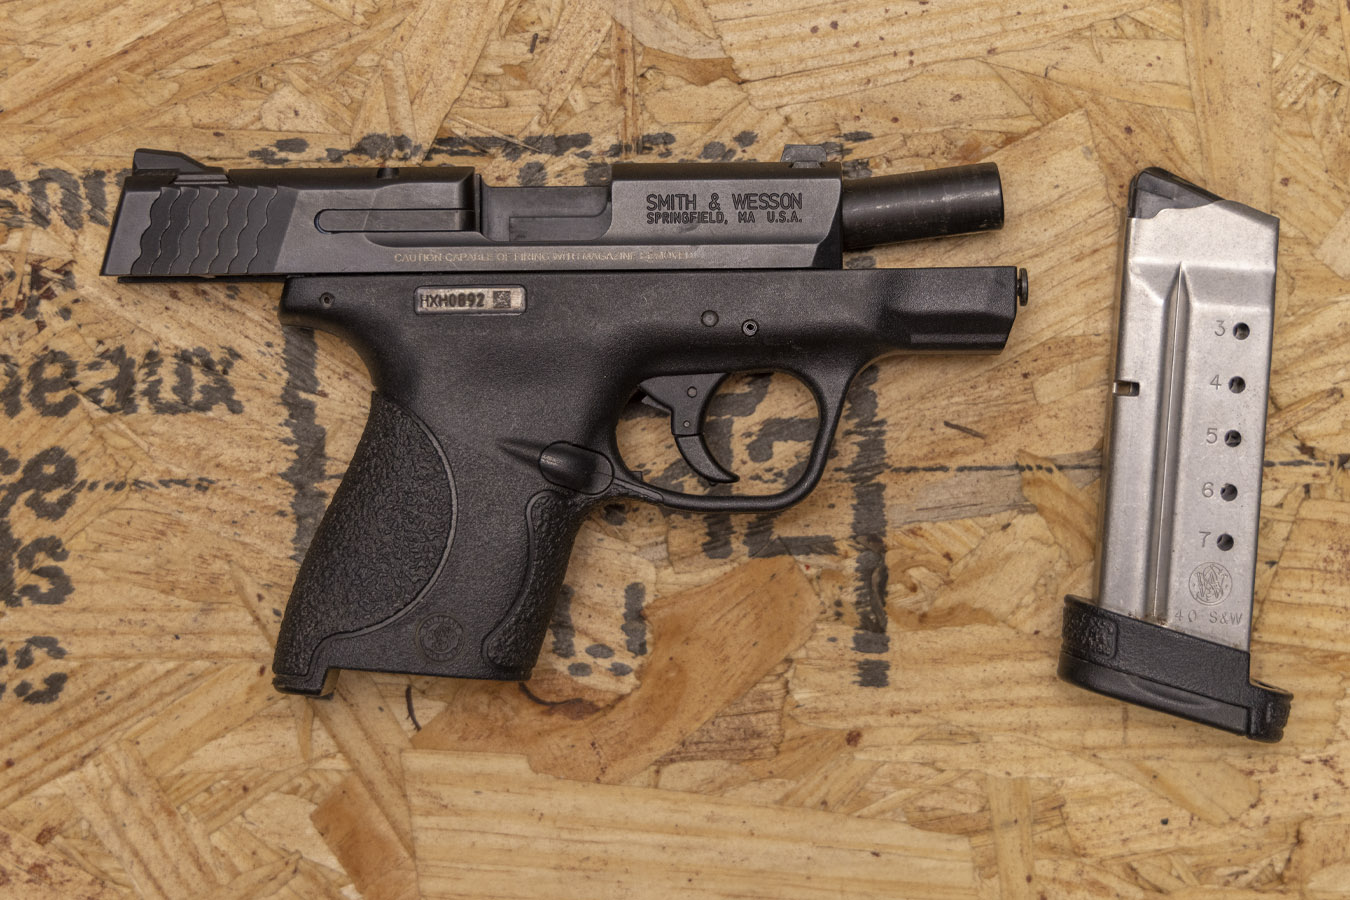 SMITH AND WESSON MP SHIELD 40SW POLICE TRADE-IN PISTOL